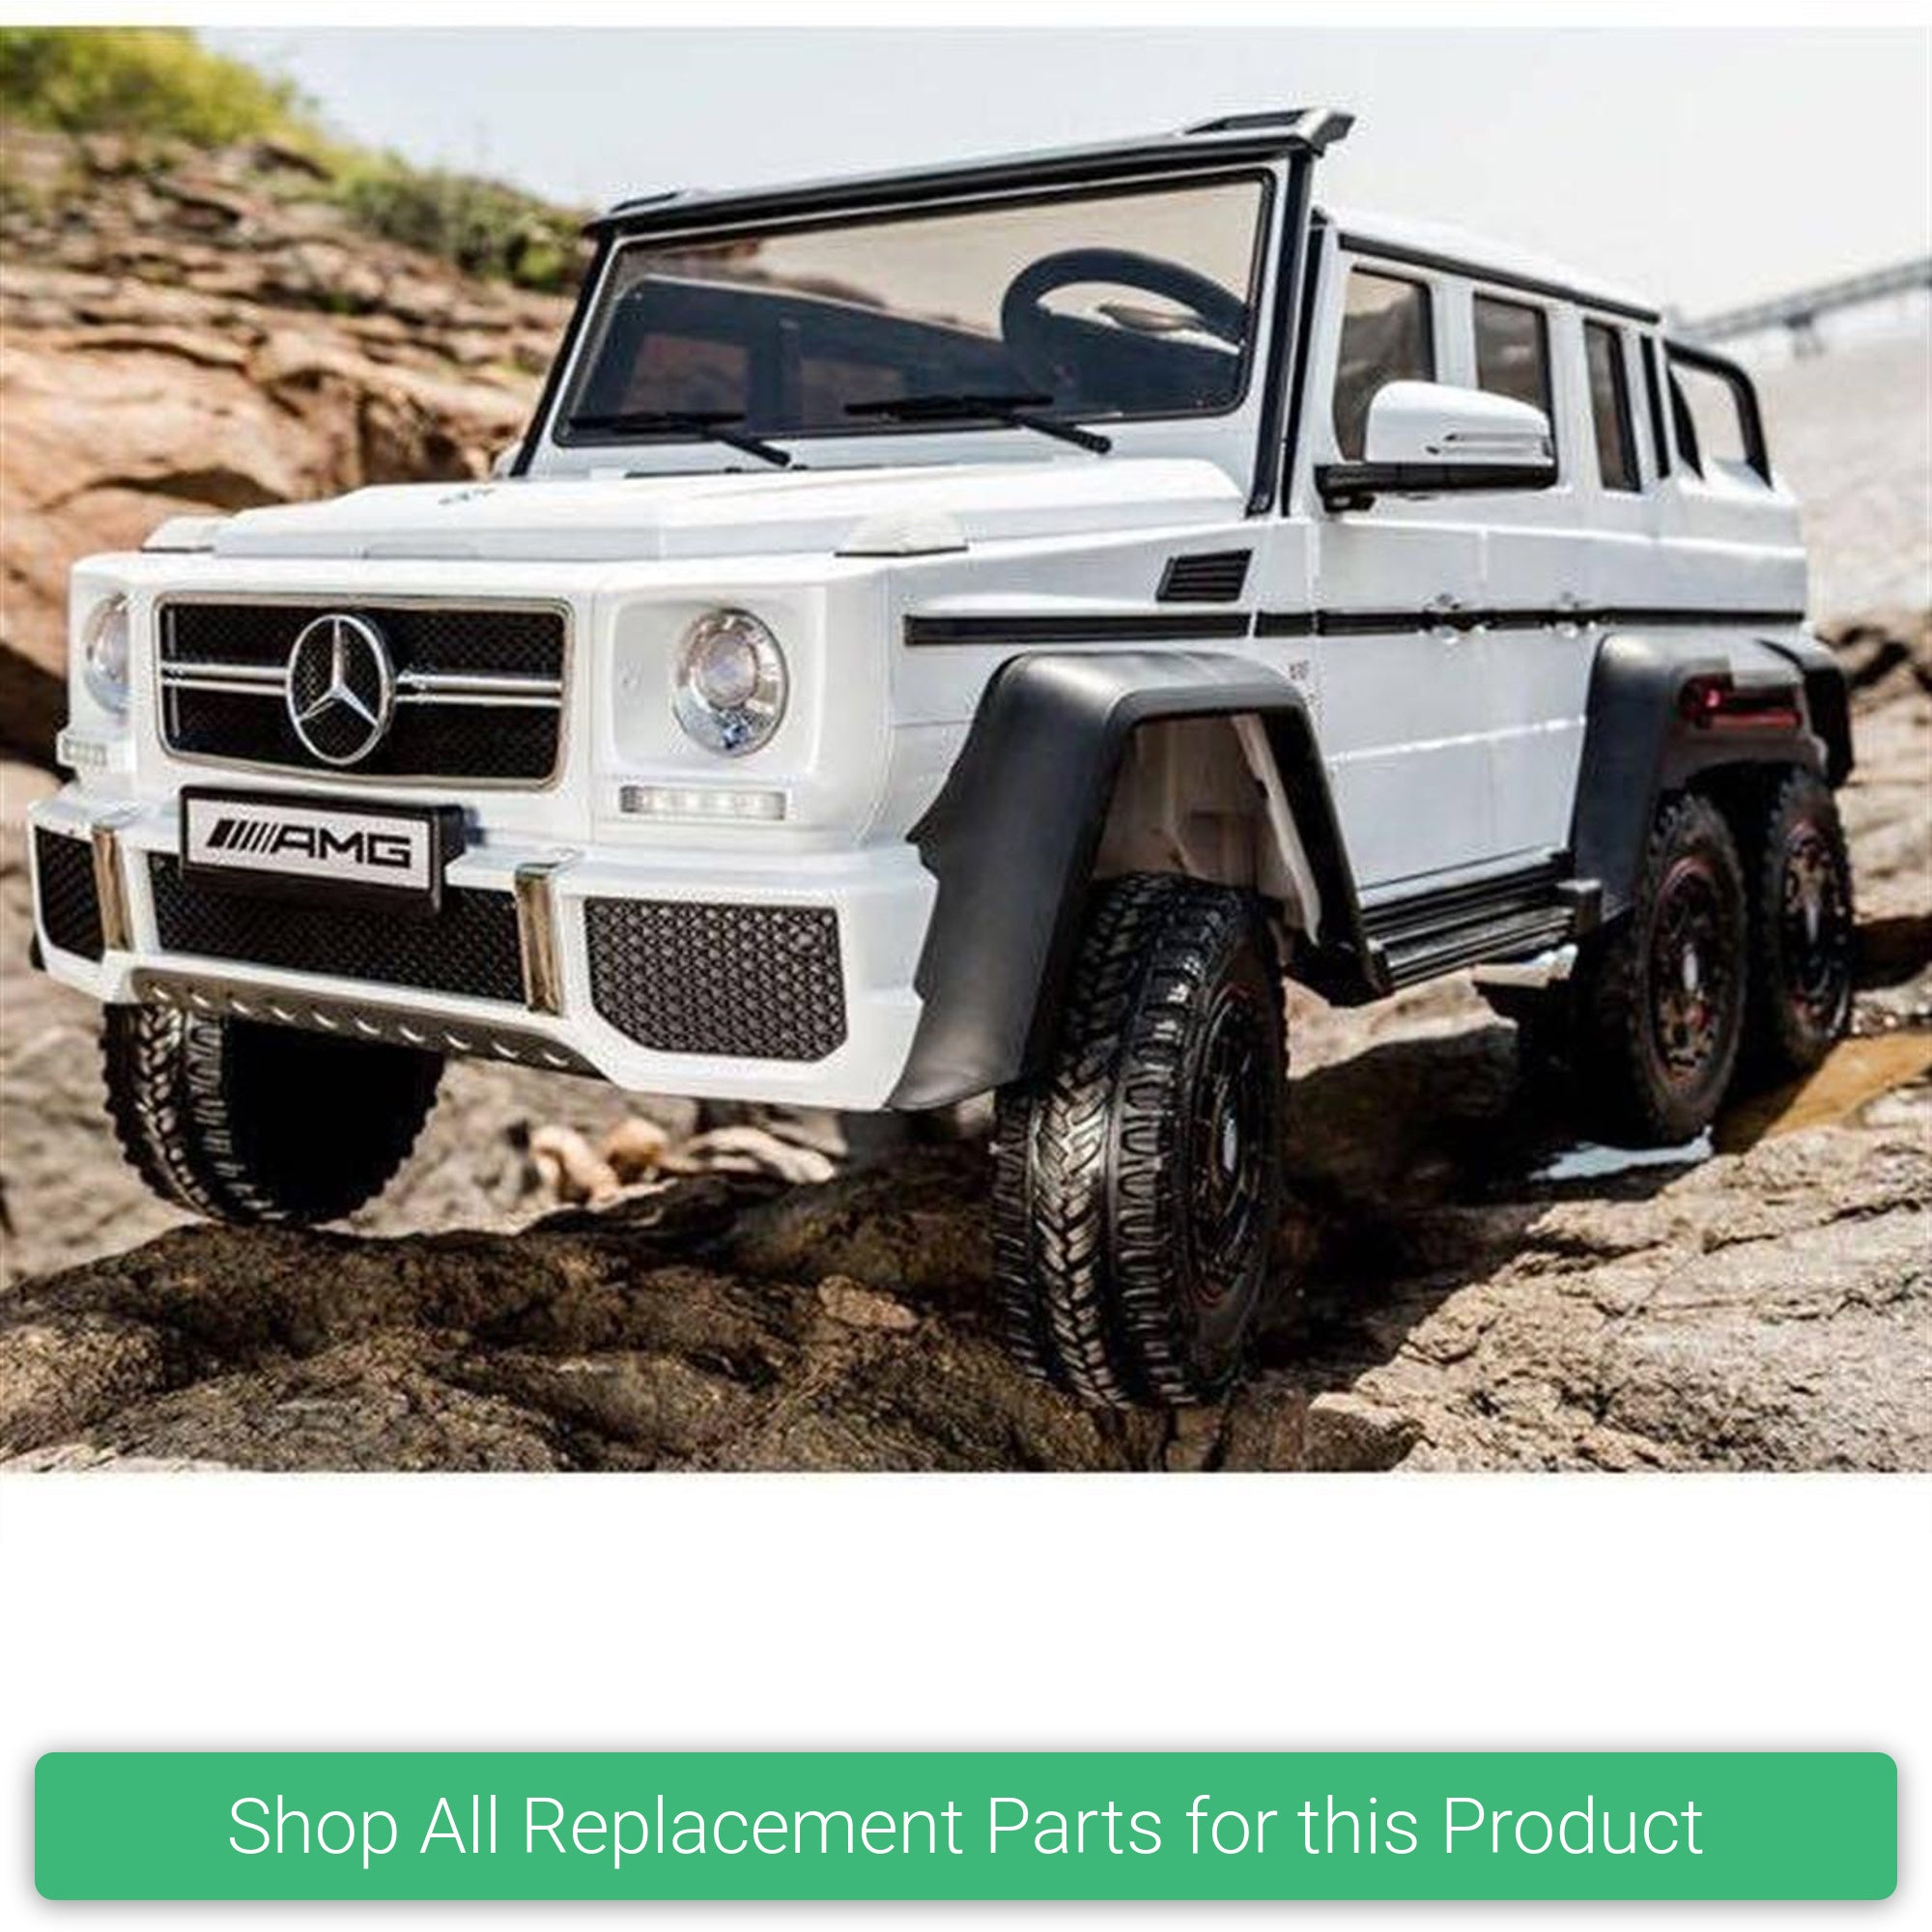 Replacement Parts and Spares for Kids Mercedes G63 6X6 - Mini - MIN-6X6-WHI - DMD-318